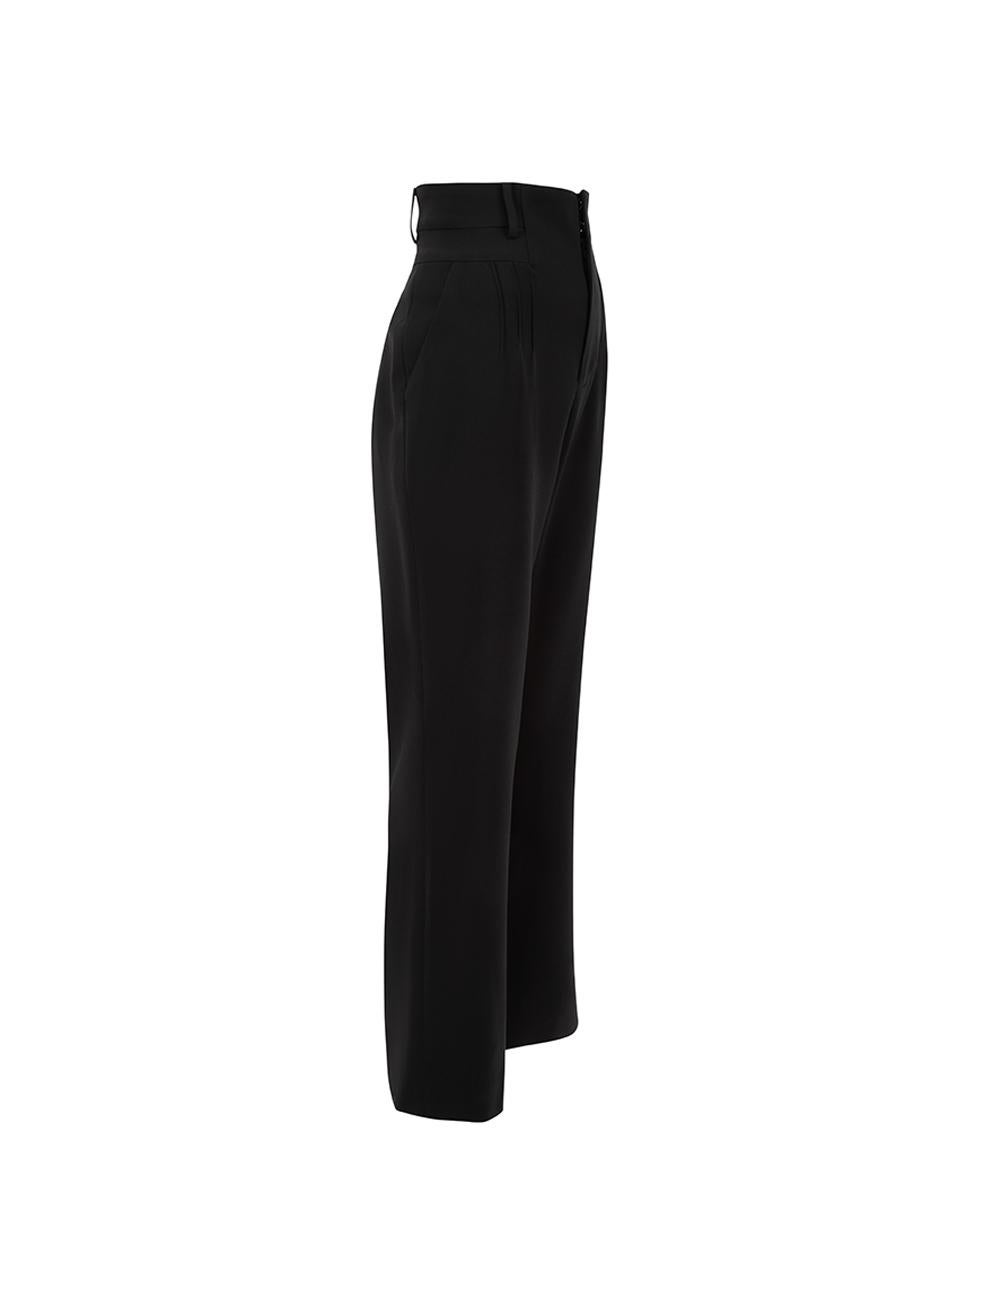 CONDITION is Very good. Hardly any visible wear to trouses is evident on this used Altuzarra designer resale item. 
 
 Details
  Black
 Synthetic
 Straight leg suit trousers
 High rise
 Front zip closure with clasp and button
 Belt hoops
 Pleated